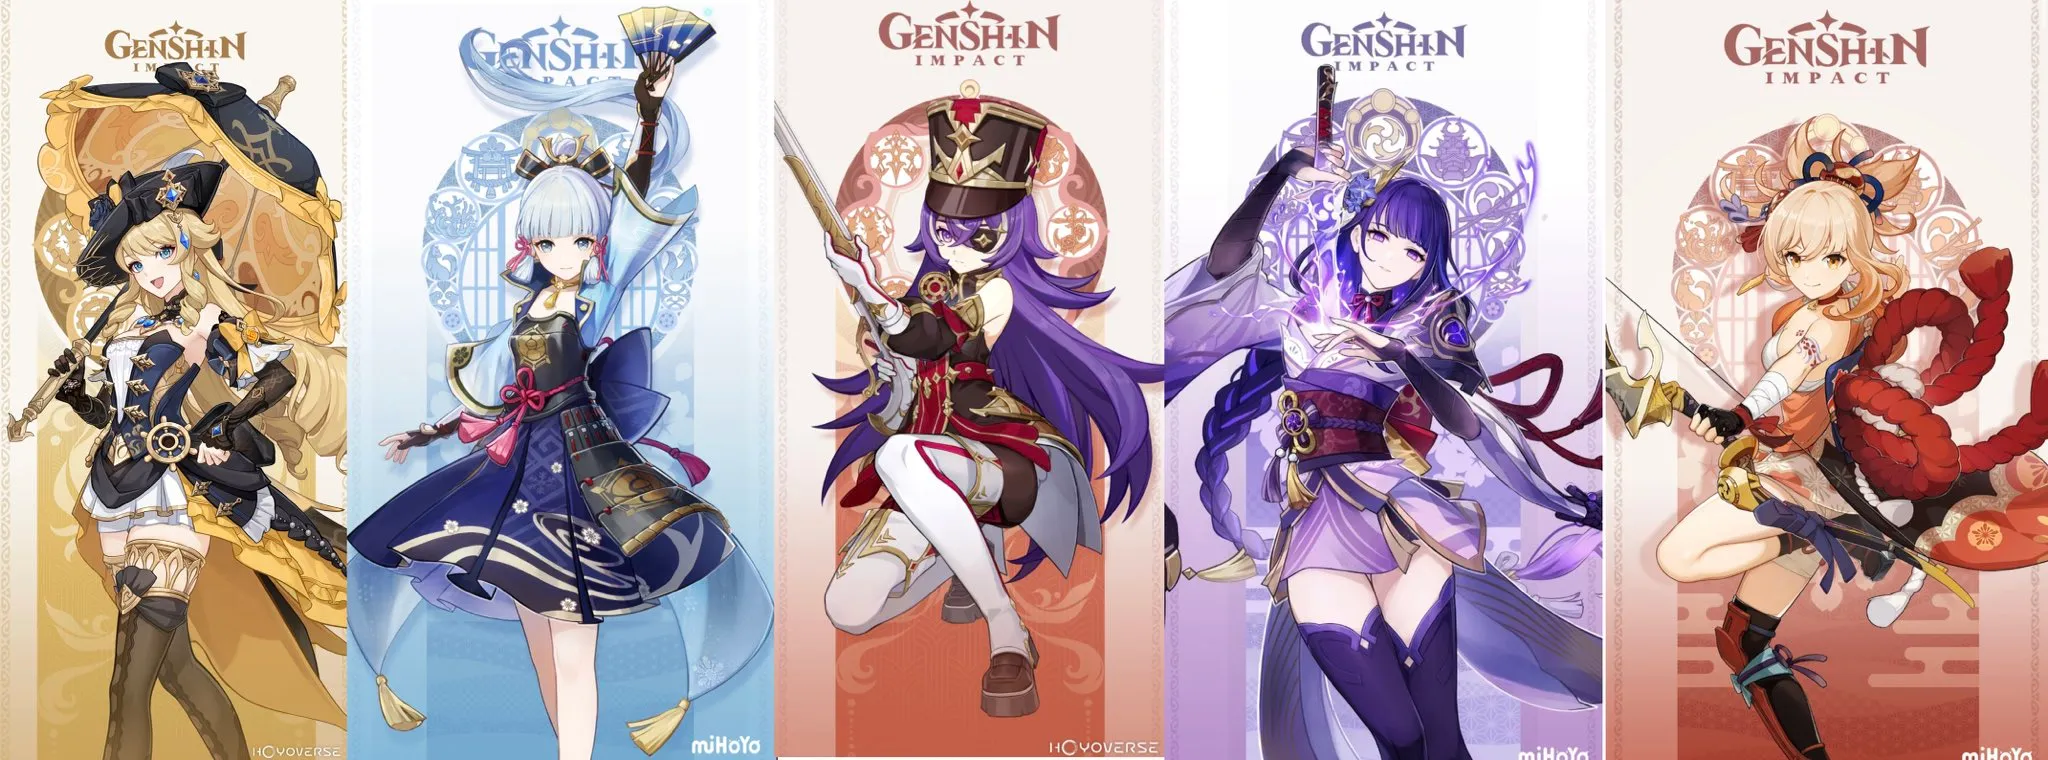 Genshin Impact 4.3 livestream date and time, 4.3 Banner leaks